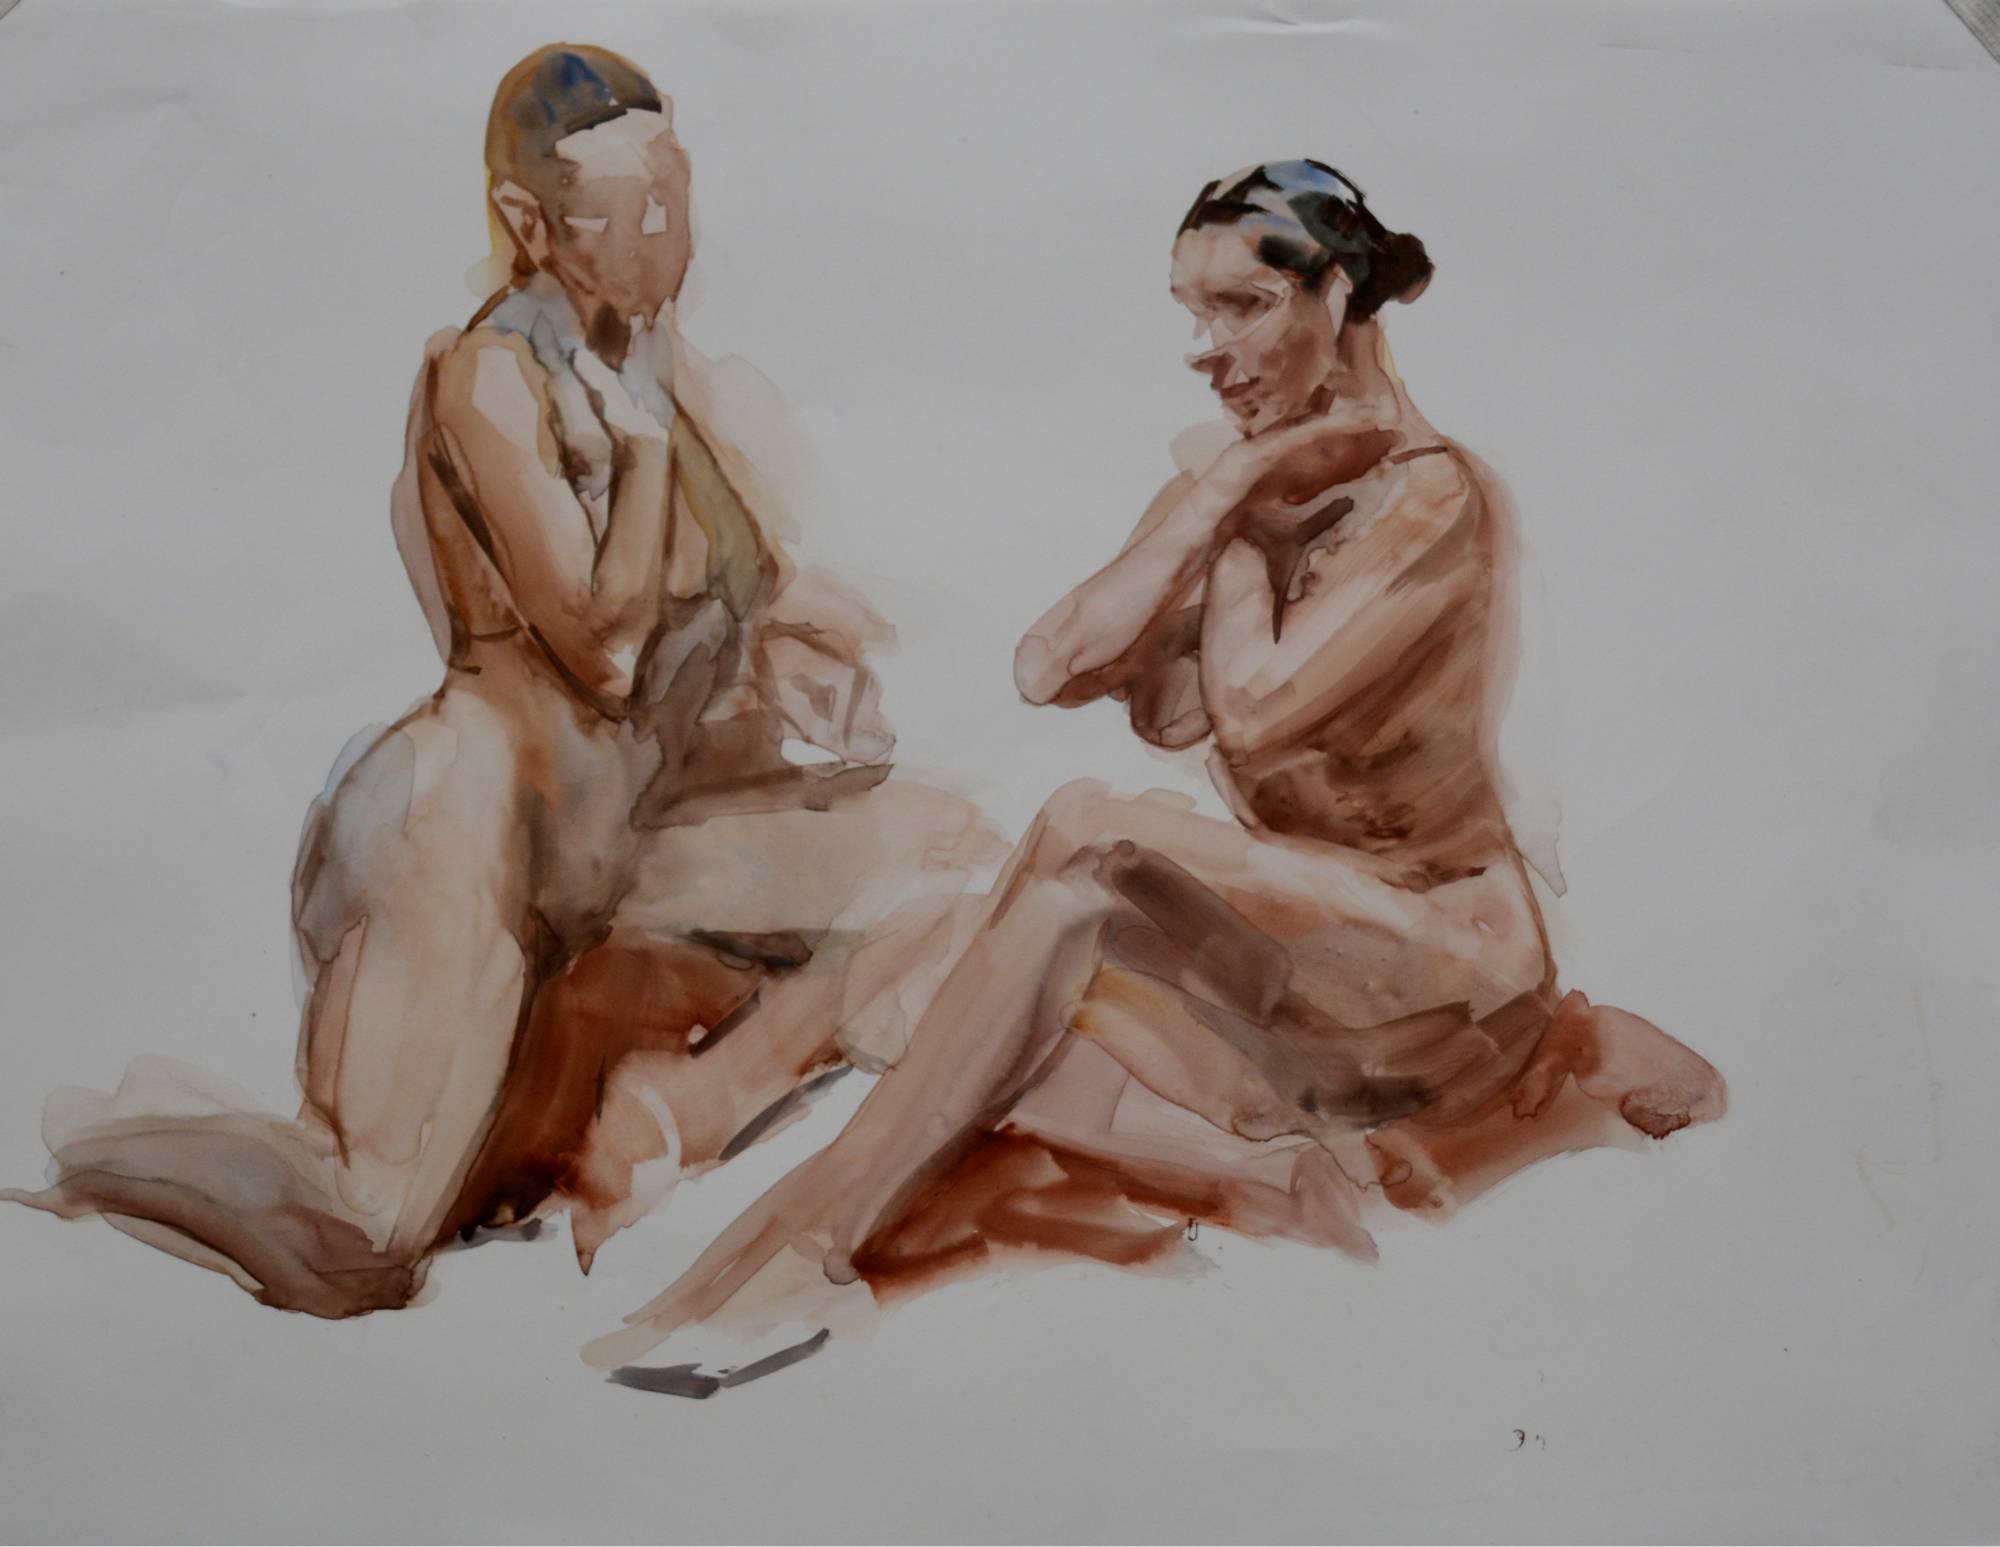 watercolor sketch of the same model in two different seated poses